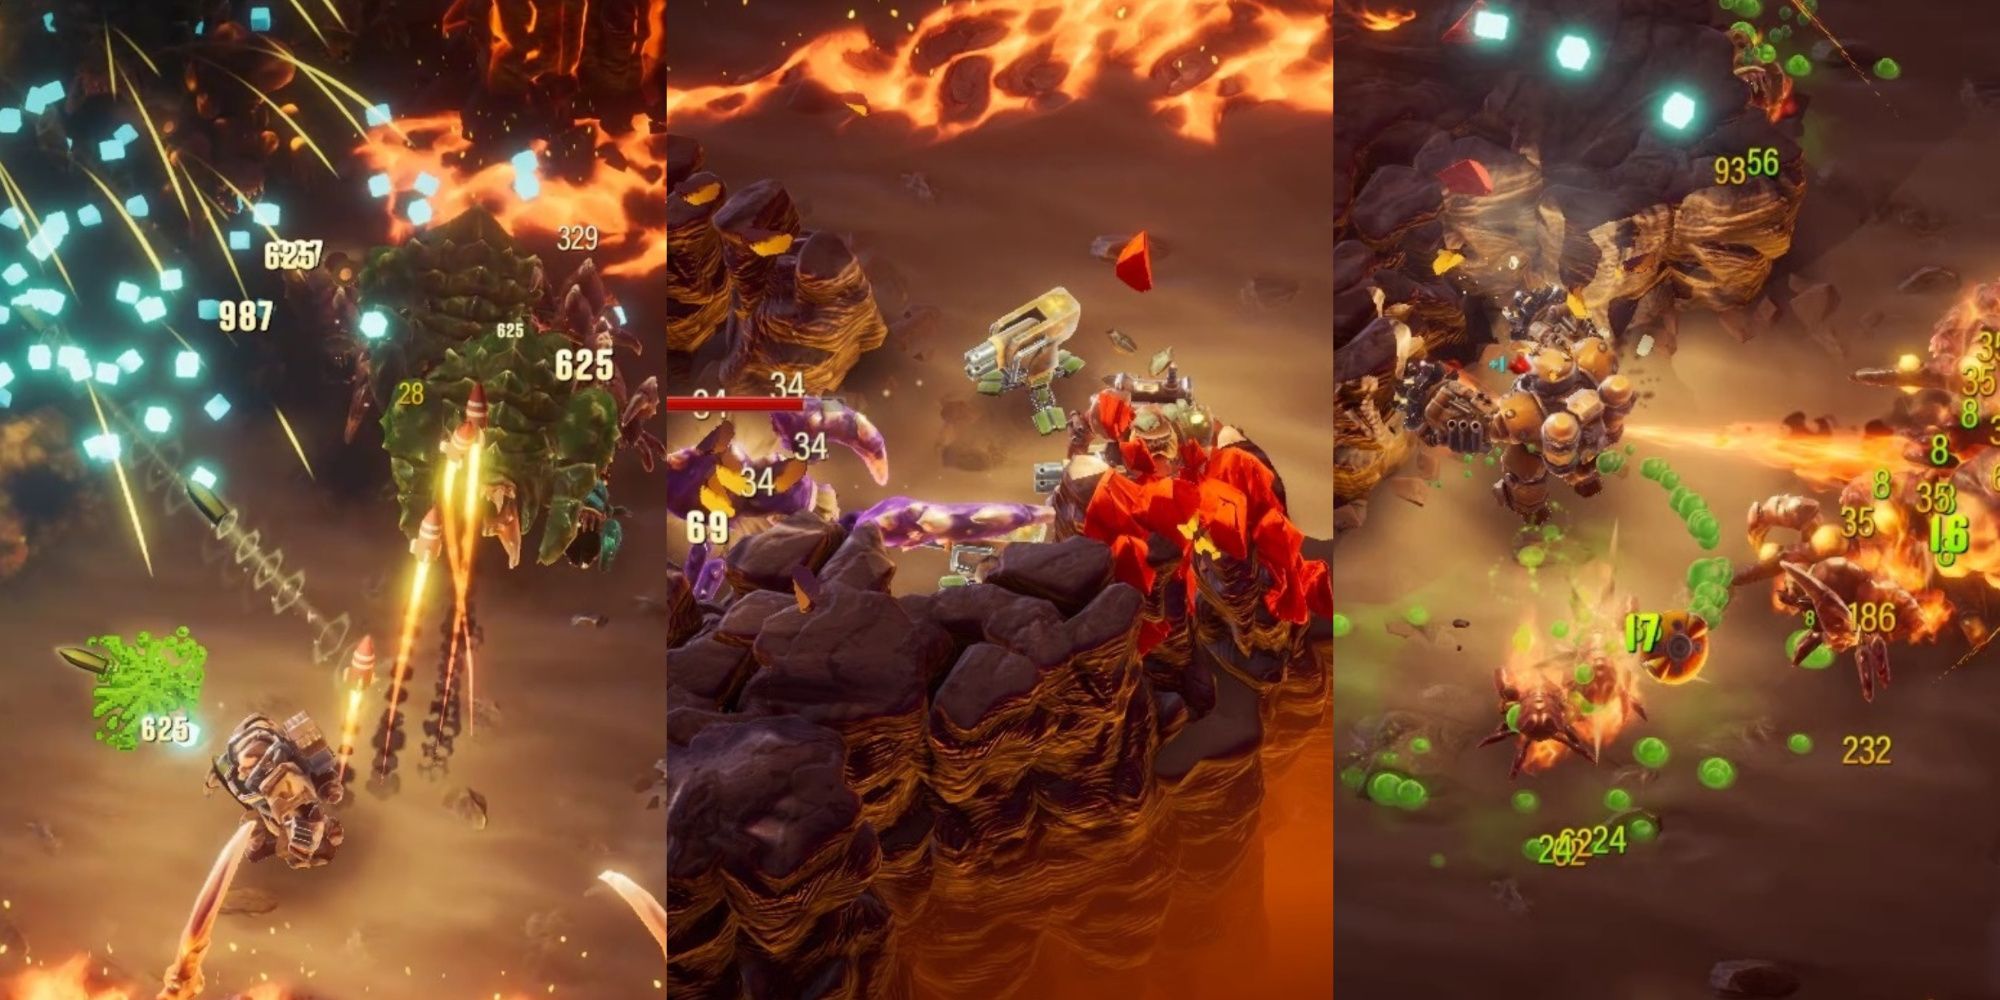 Deep Rock Galactic Survivor split image the Gunner, Engineer, and Driller fighting off a swarm of bugs